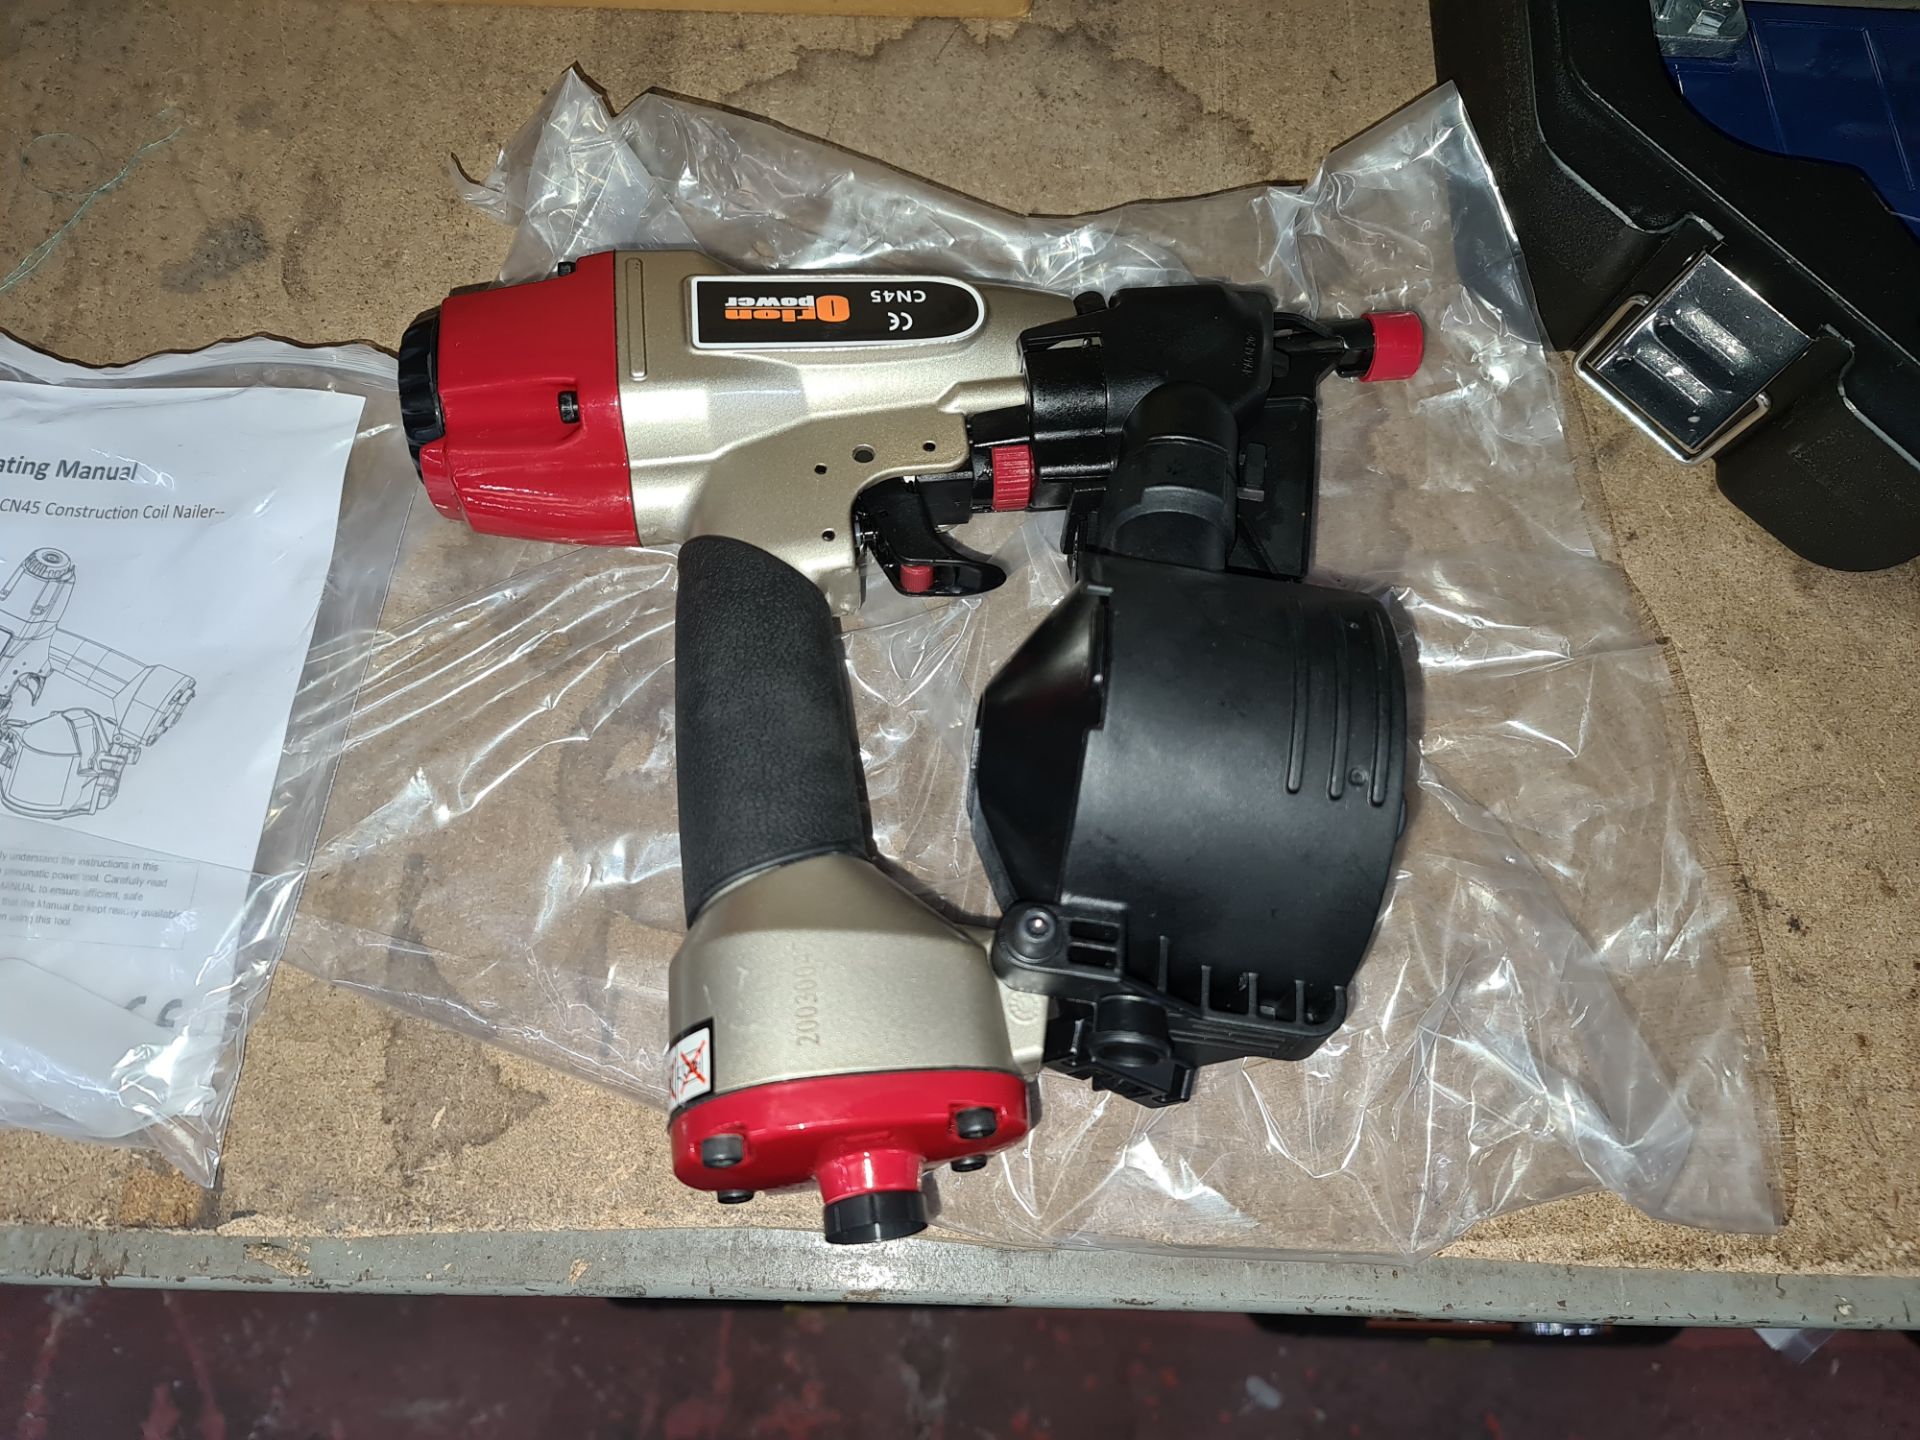 Orion power construction coil nailer model CN45Lots 31 - 328 comprise the total assets of a flooring - Image 5 of 8